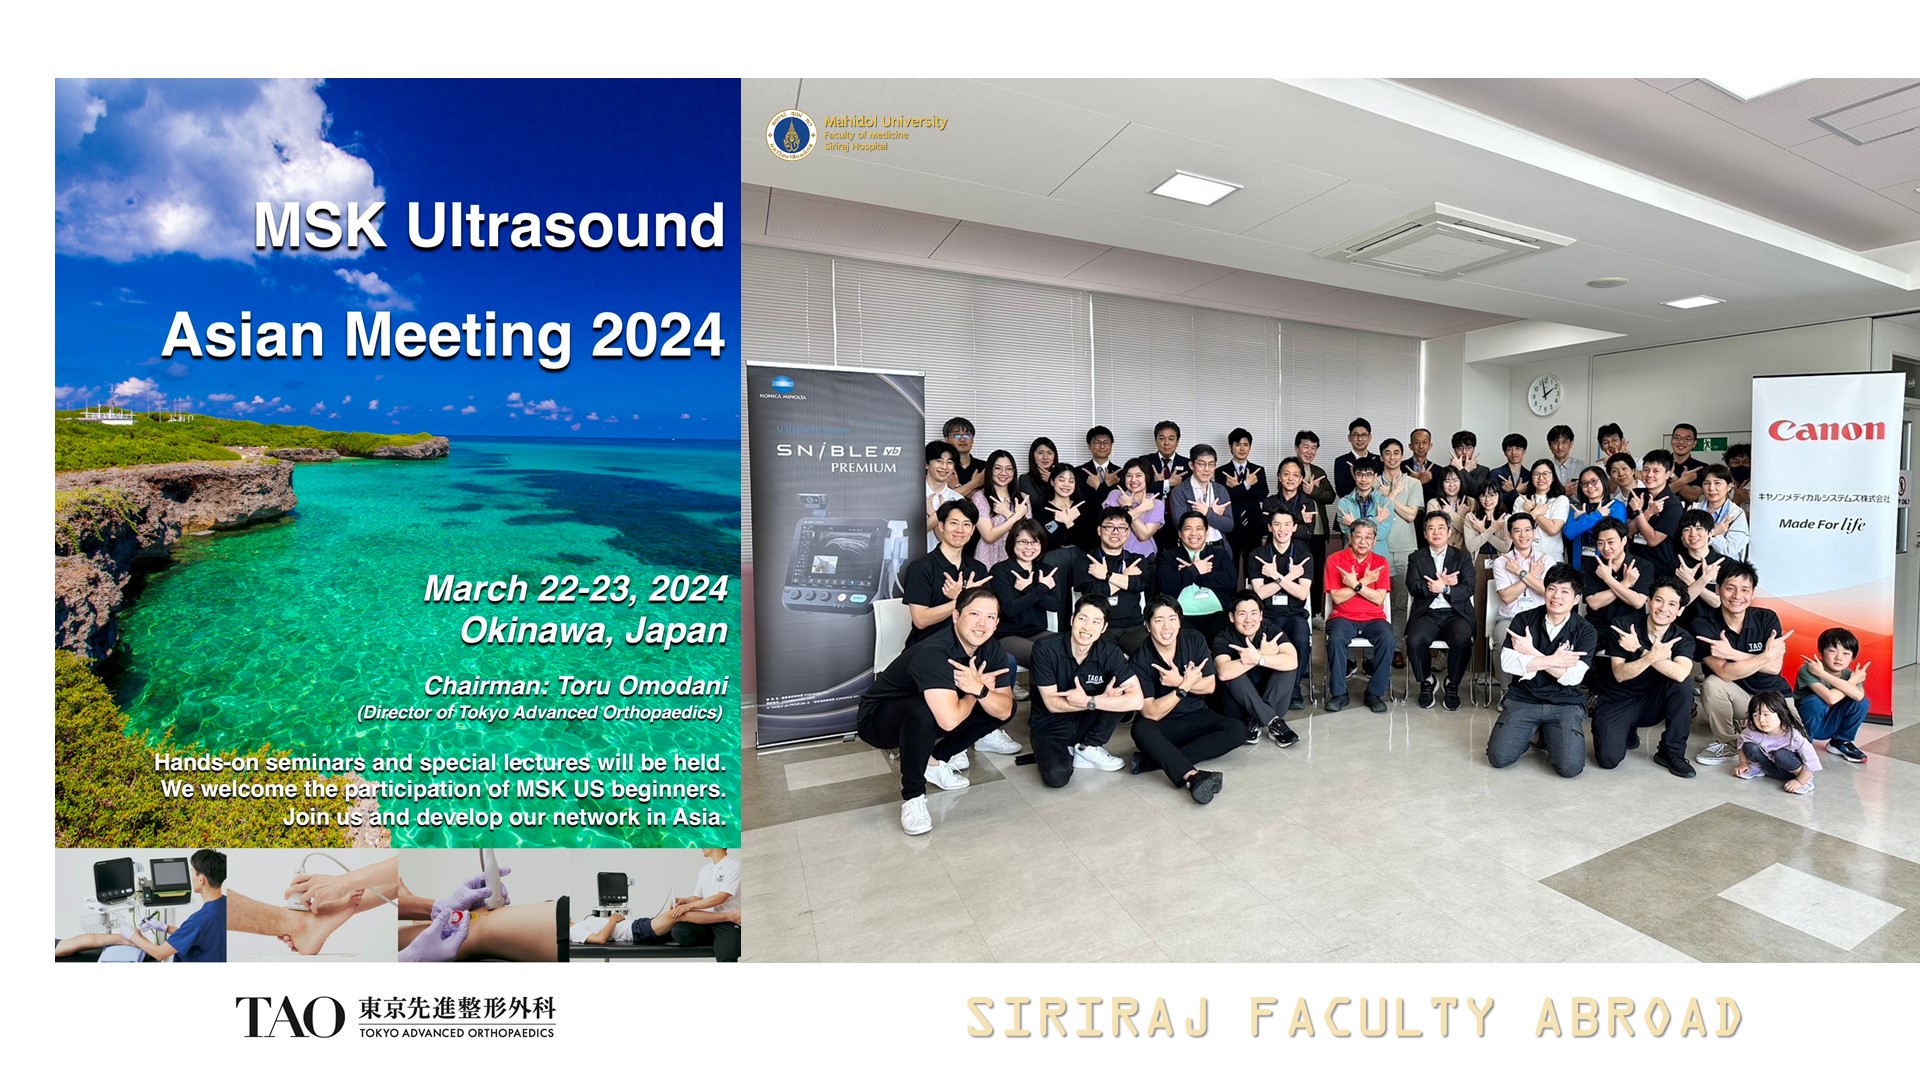 Siriraj Faculty Abroad at Musculoskeletal Ultrasound Asian Meeting 2024 in Japan